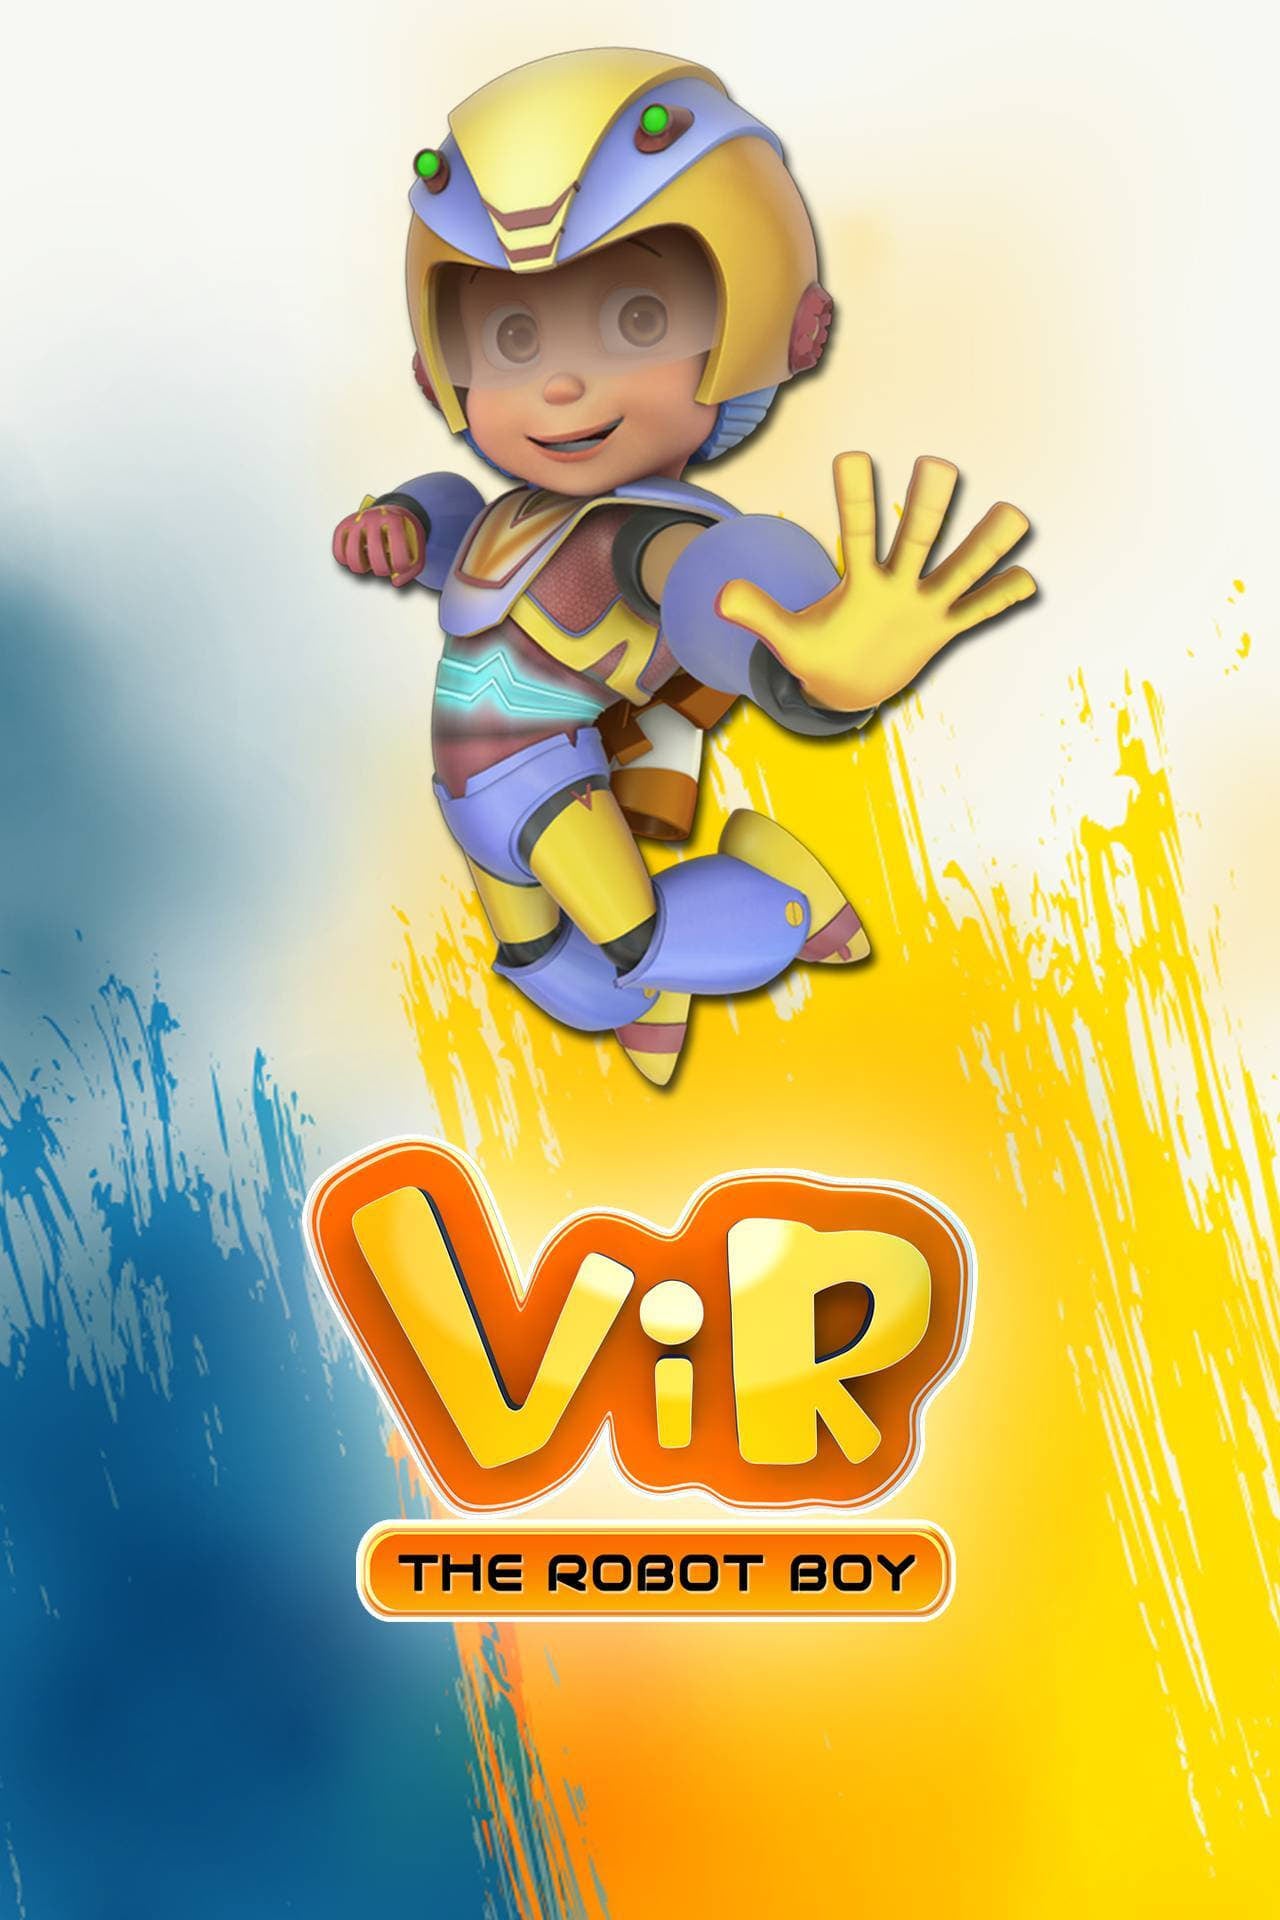 ViR: The Robot Boy (Hungama TV): Italy daily TV audience insights for  smarter content decisions - Parrot Analytics